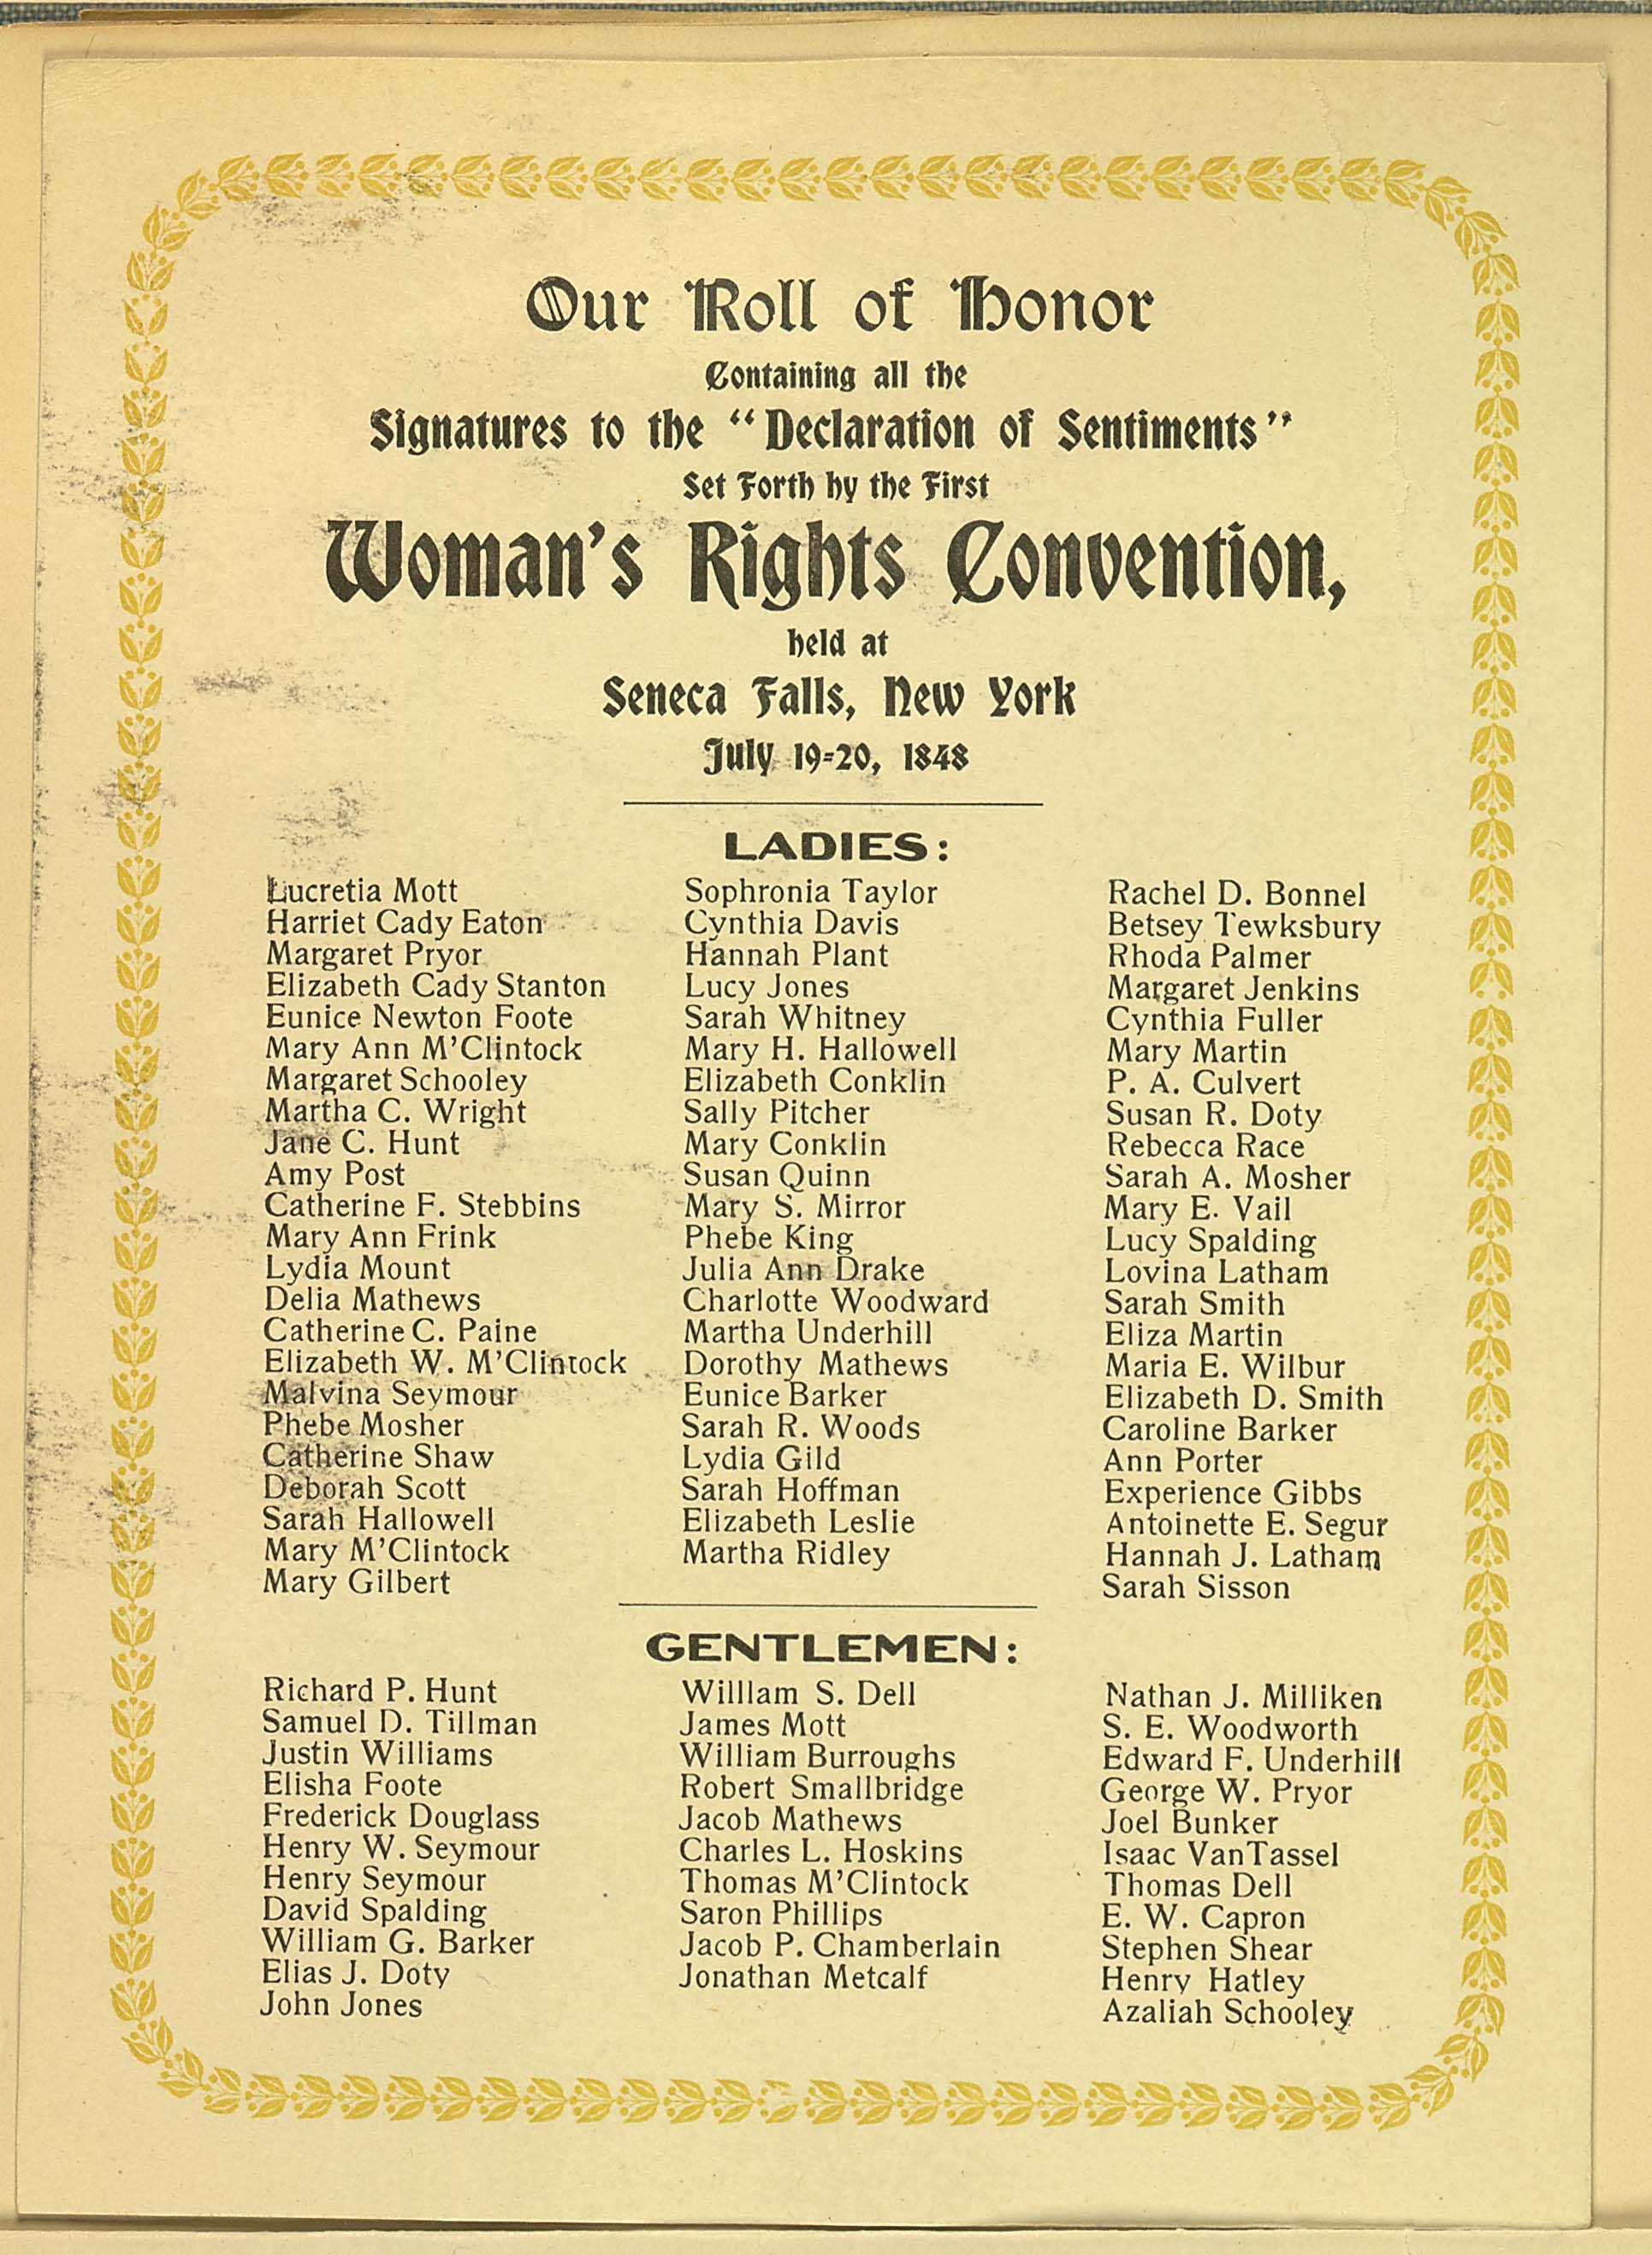 Declaration of Sentiments: The First Women's Rights Convention